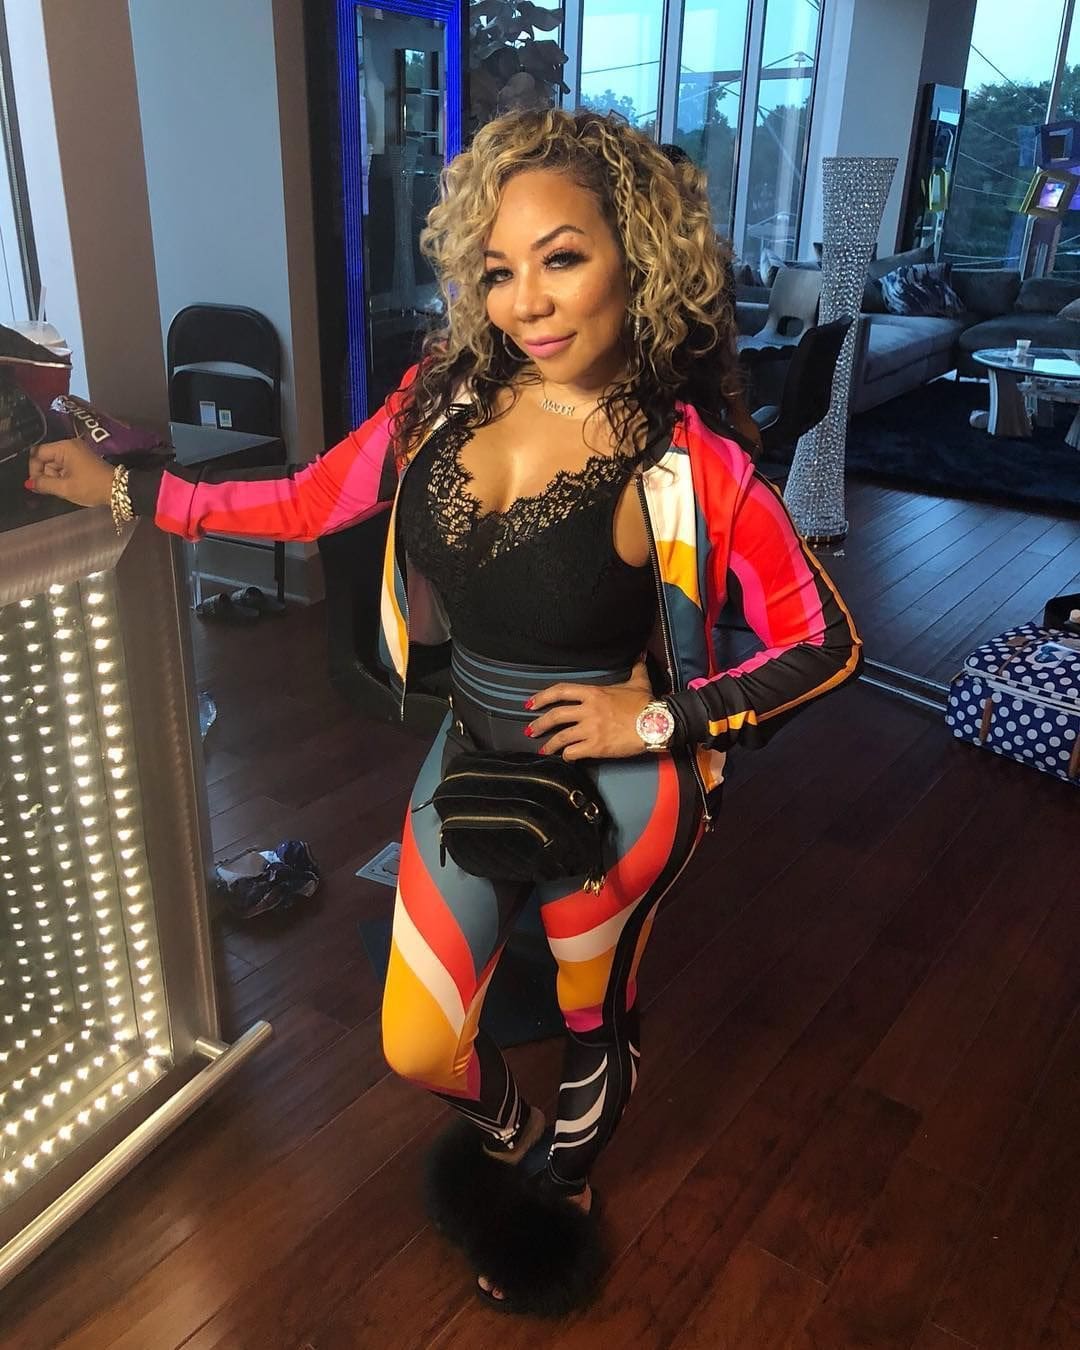 Tiny Harris' Fans Go Crazy With Excitement To See Her New Look!